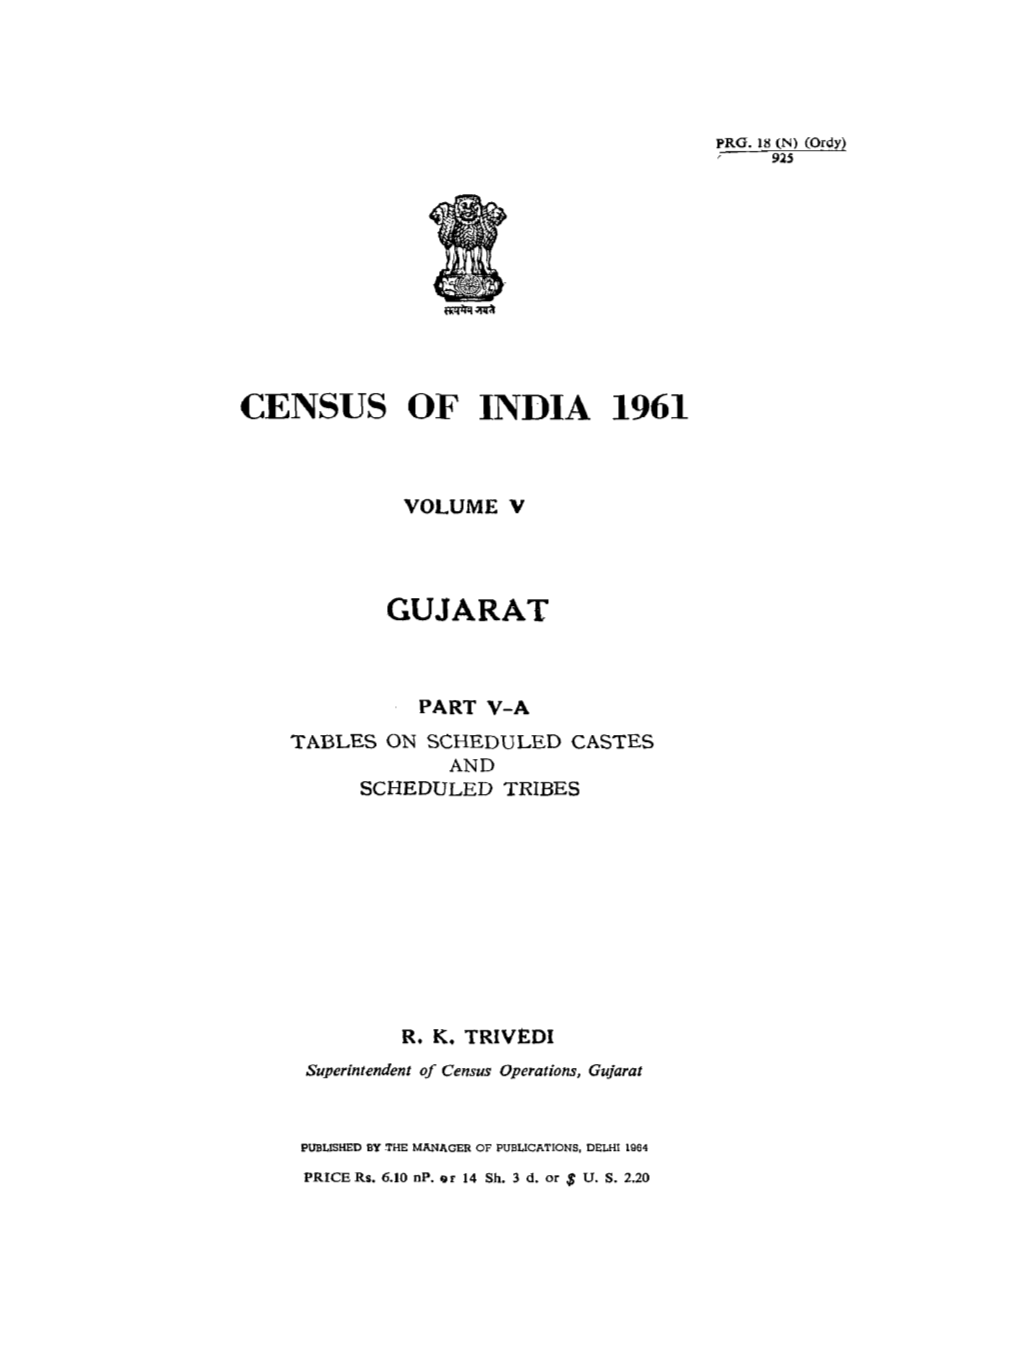 Tables on Scheduled Castes and Scheduled Tribes, Part V-A, Vol-V